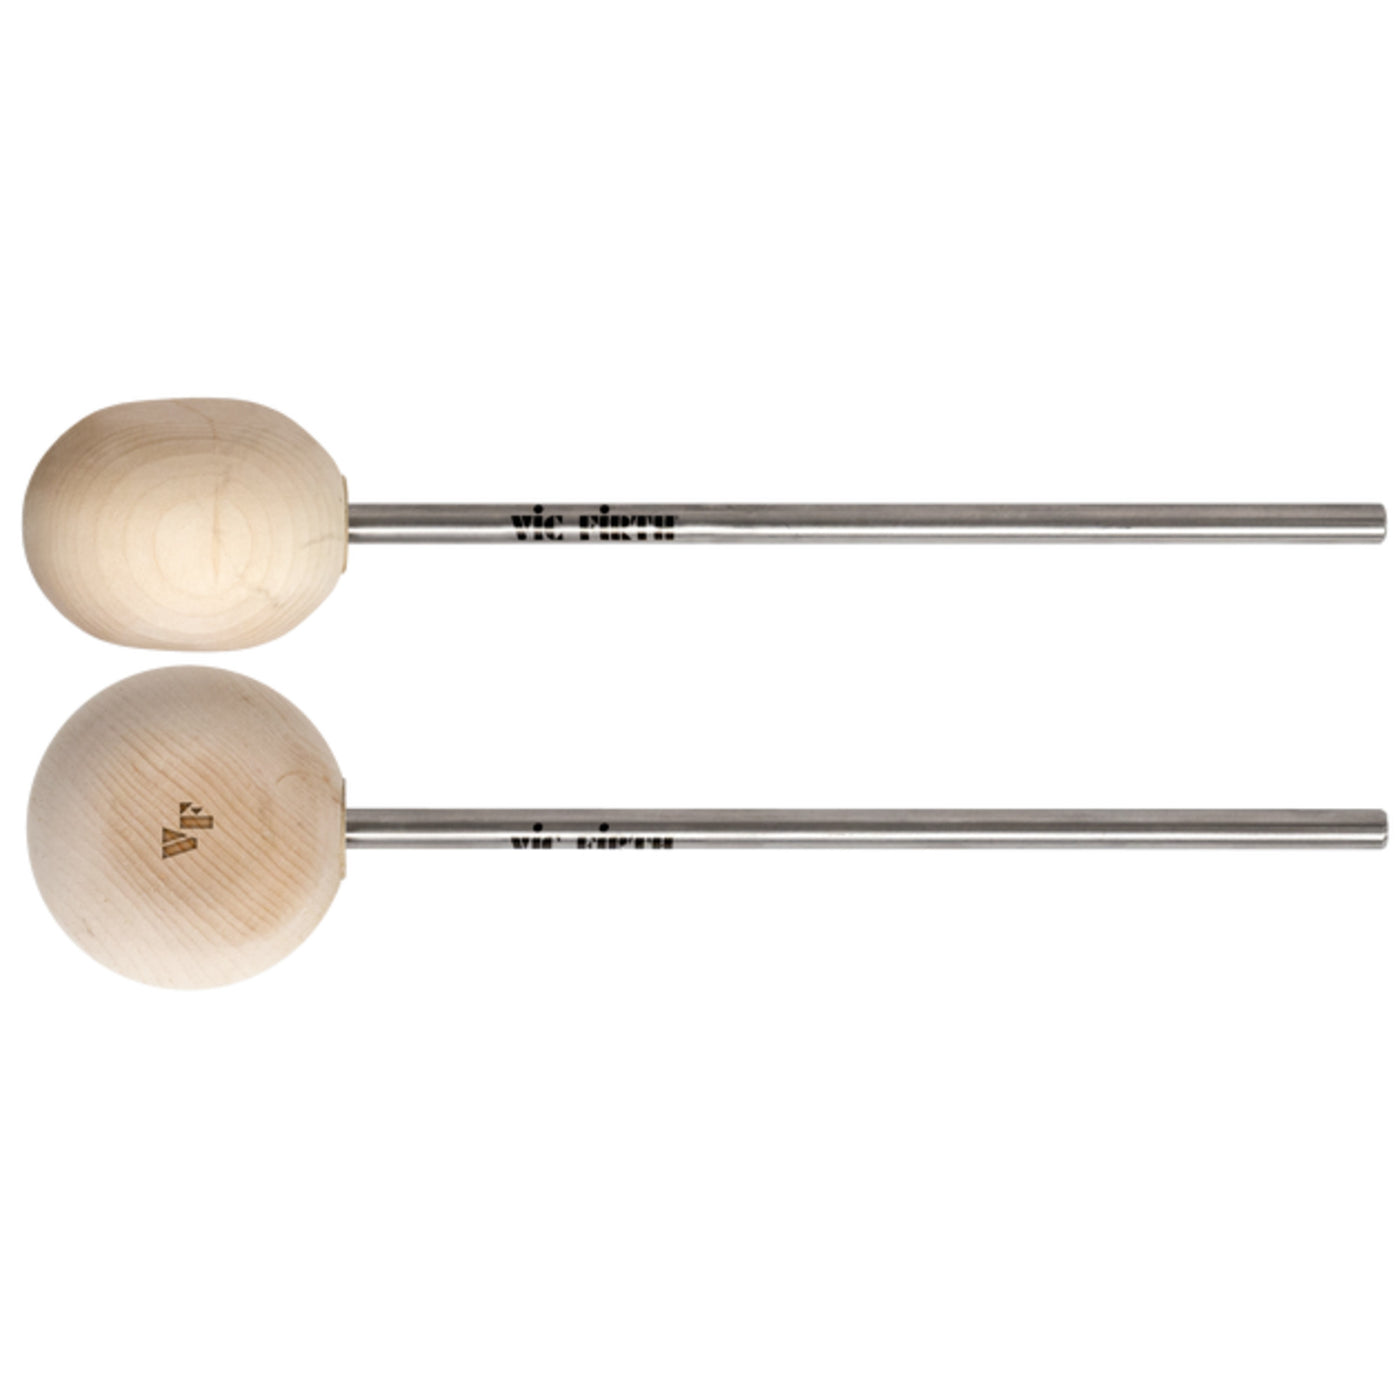 Vic Firth Vickick Bass Drum Beater- Hard Maple, Radial Head Bass Beater (VKB2)